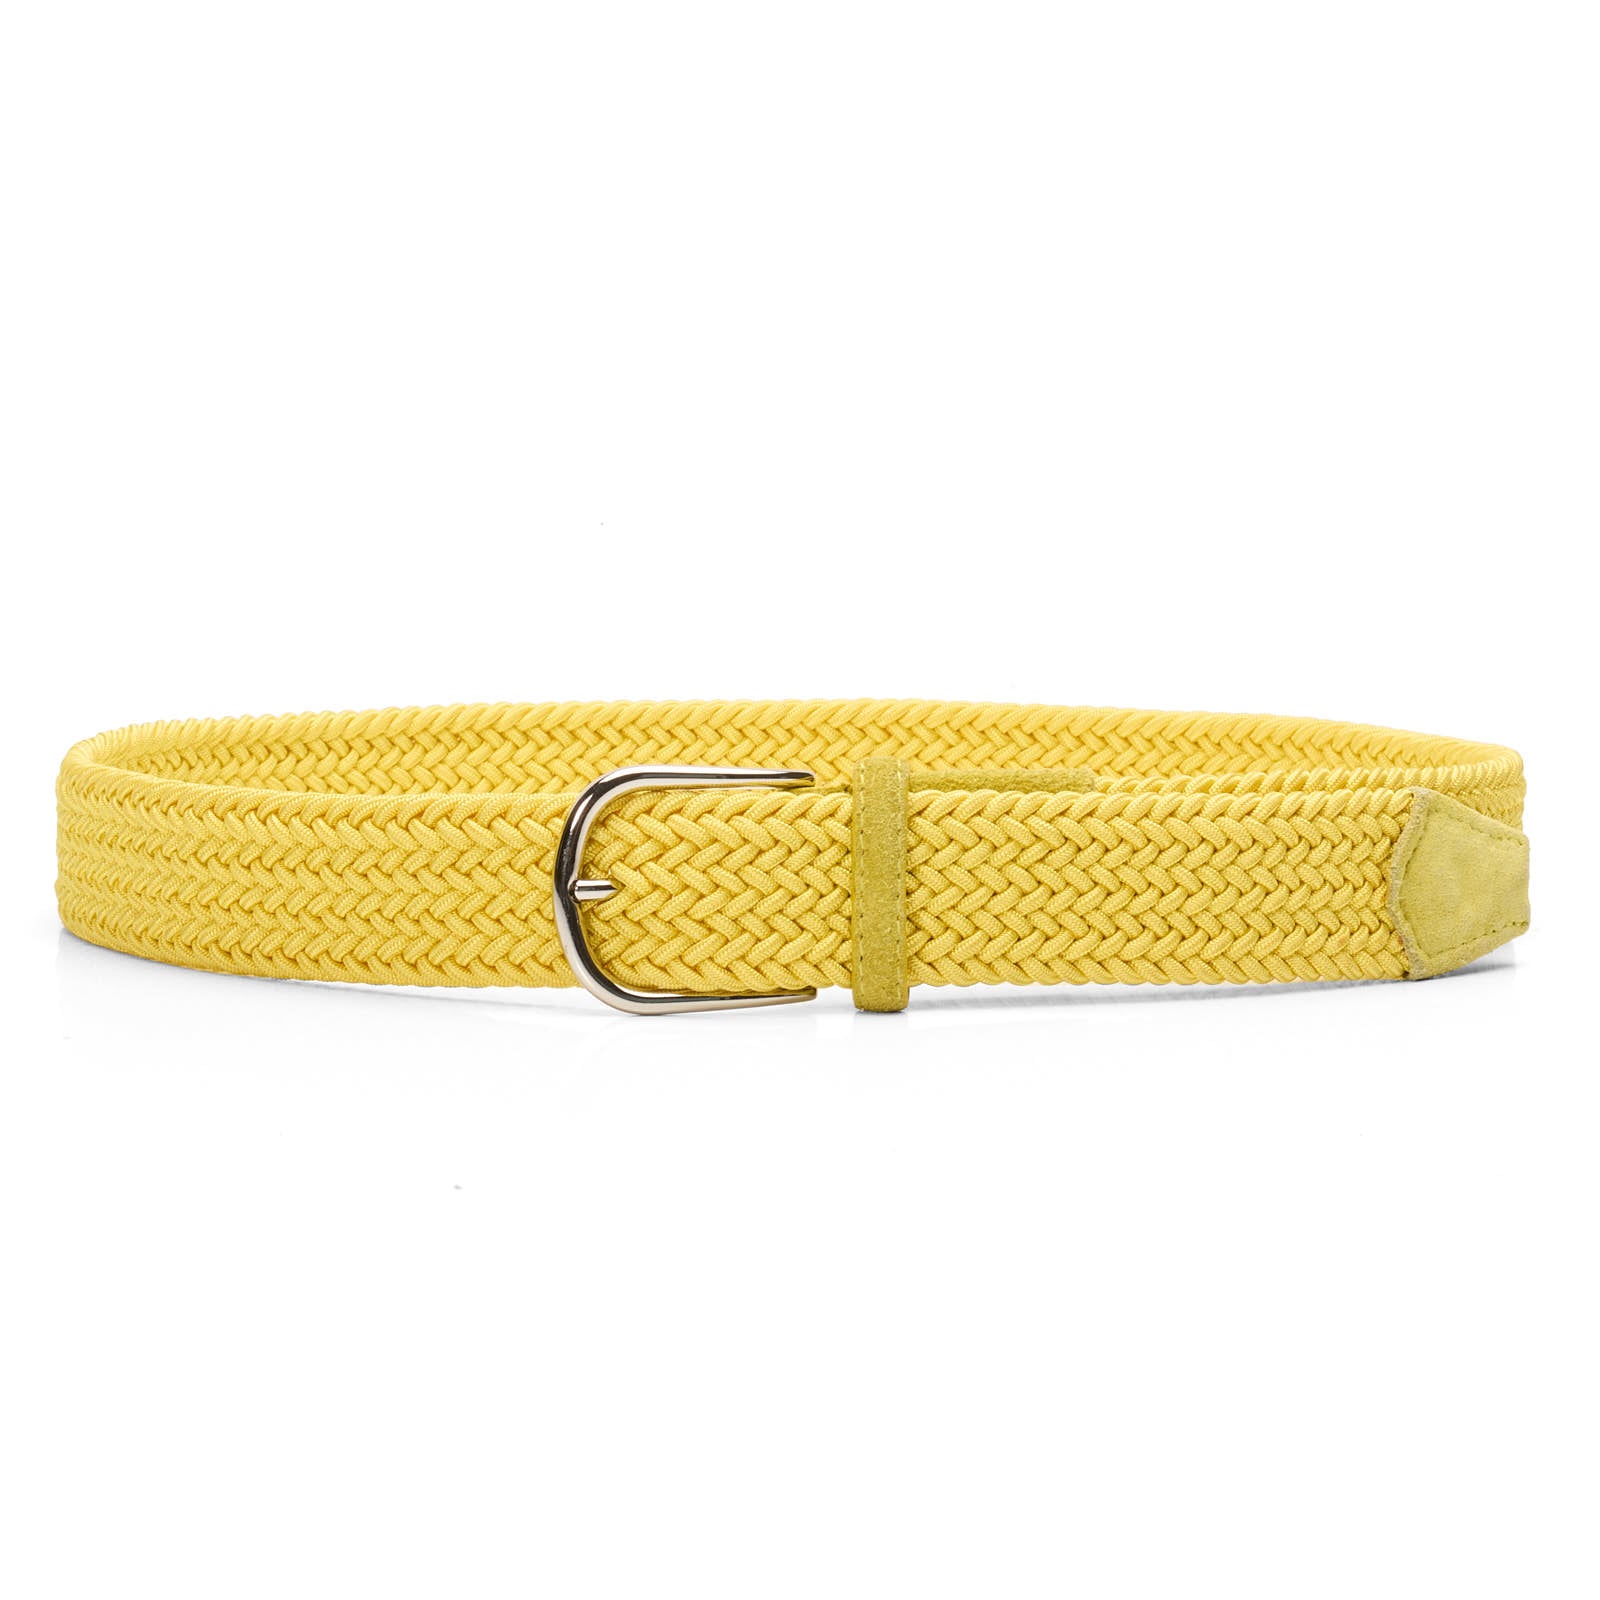 VANNUCCI Milano Yellow Stretch Woven Braided Belt 100cm NEW 46"